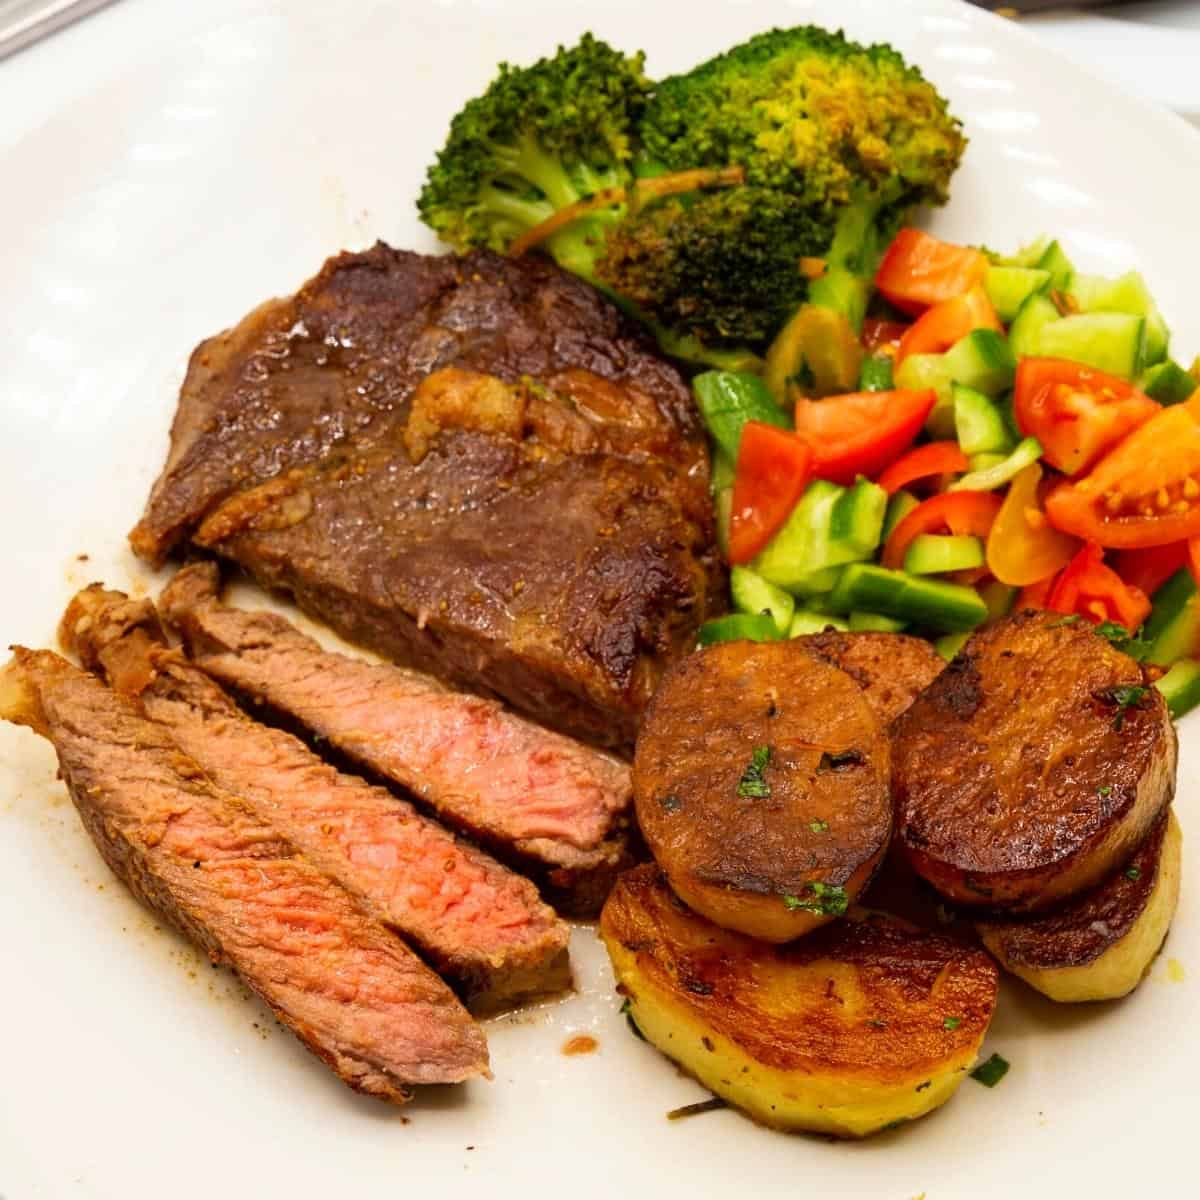 A plate with steak slices cooked medium.